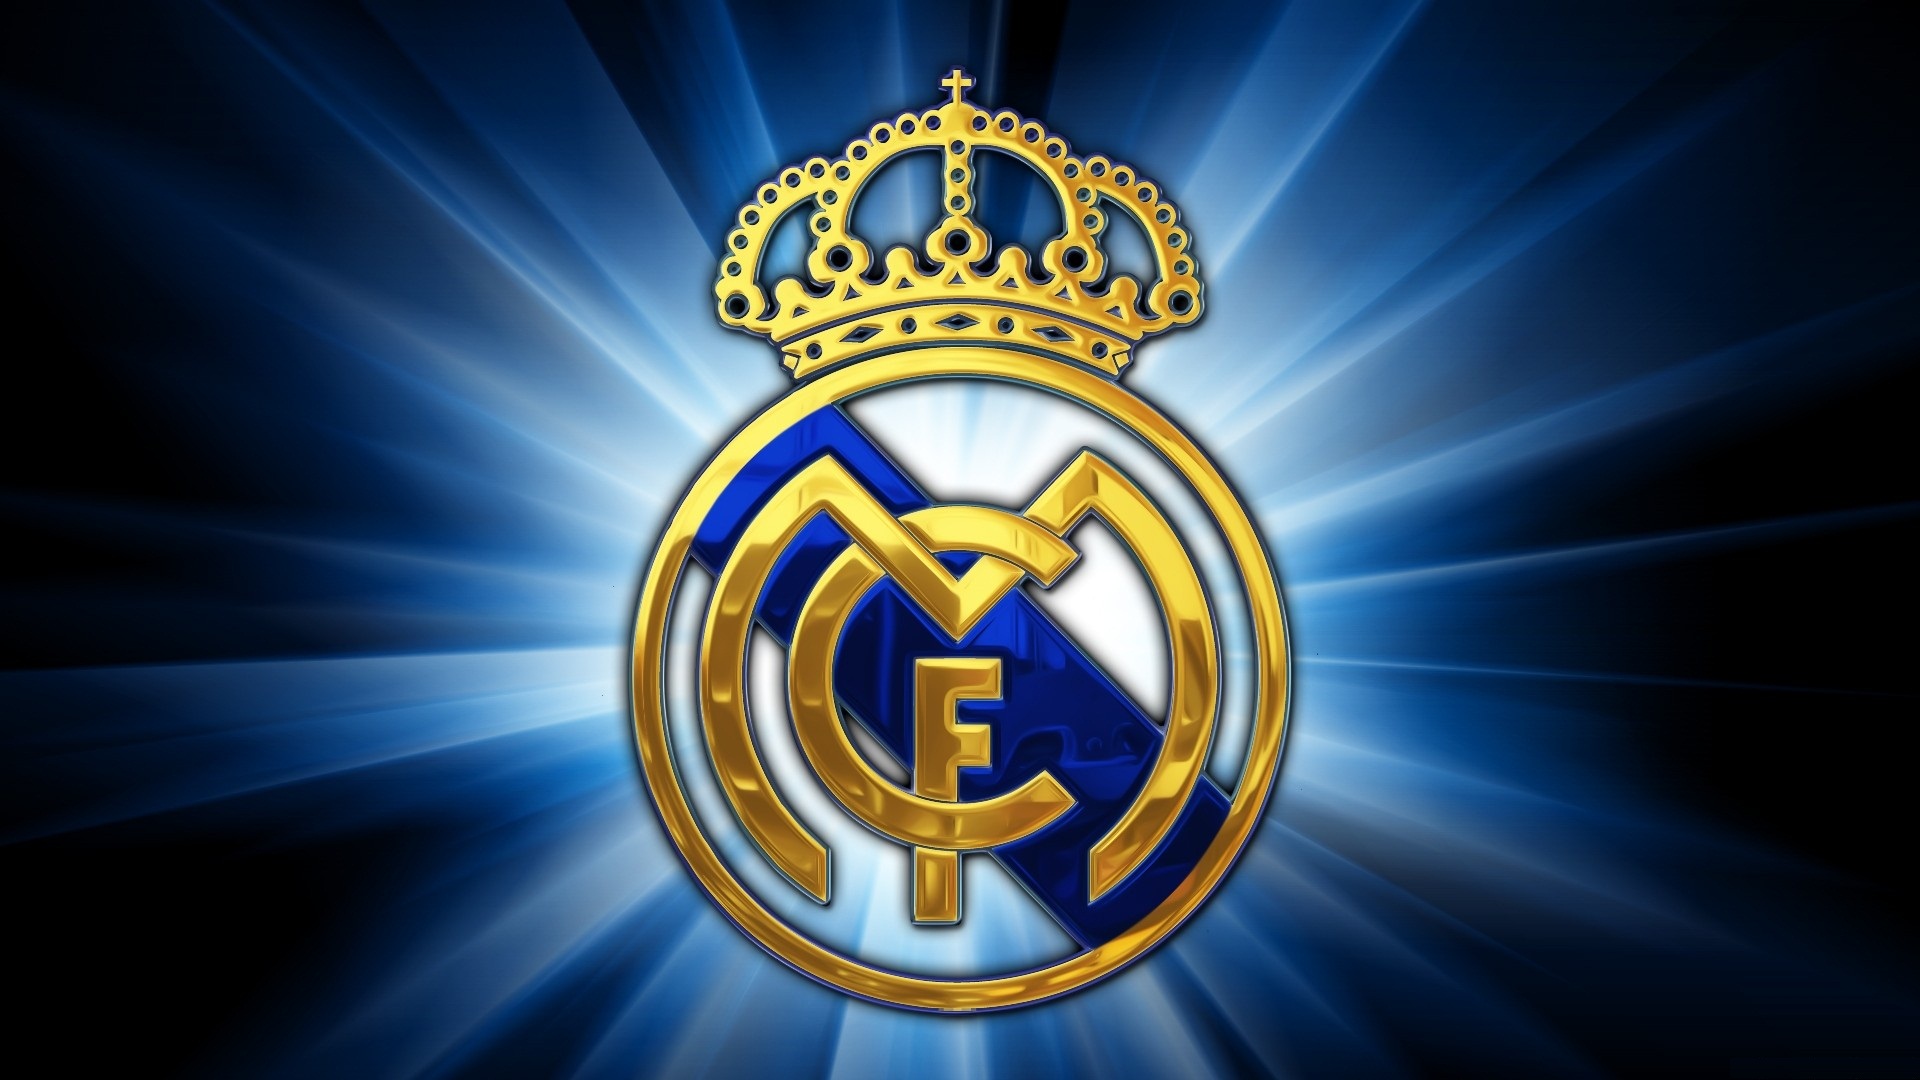 Real Madrid Wallpaper For Mac With Resolution 1920X1080 pixel. You can make this wallpaper for your Mac or Windows Desktop Background, iPhone, Android or Tablet and another Smartphone device for free